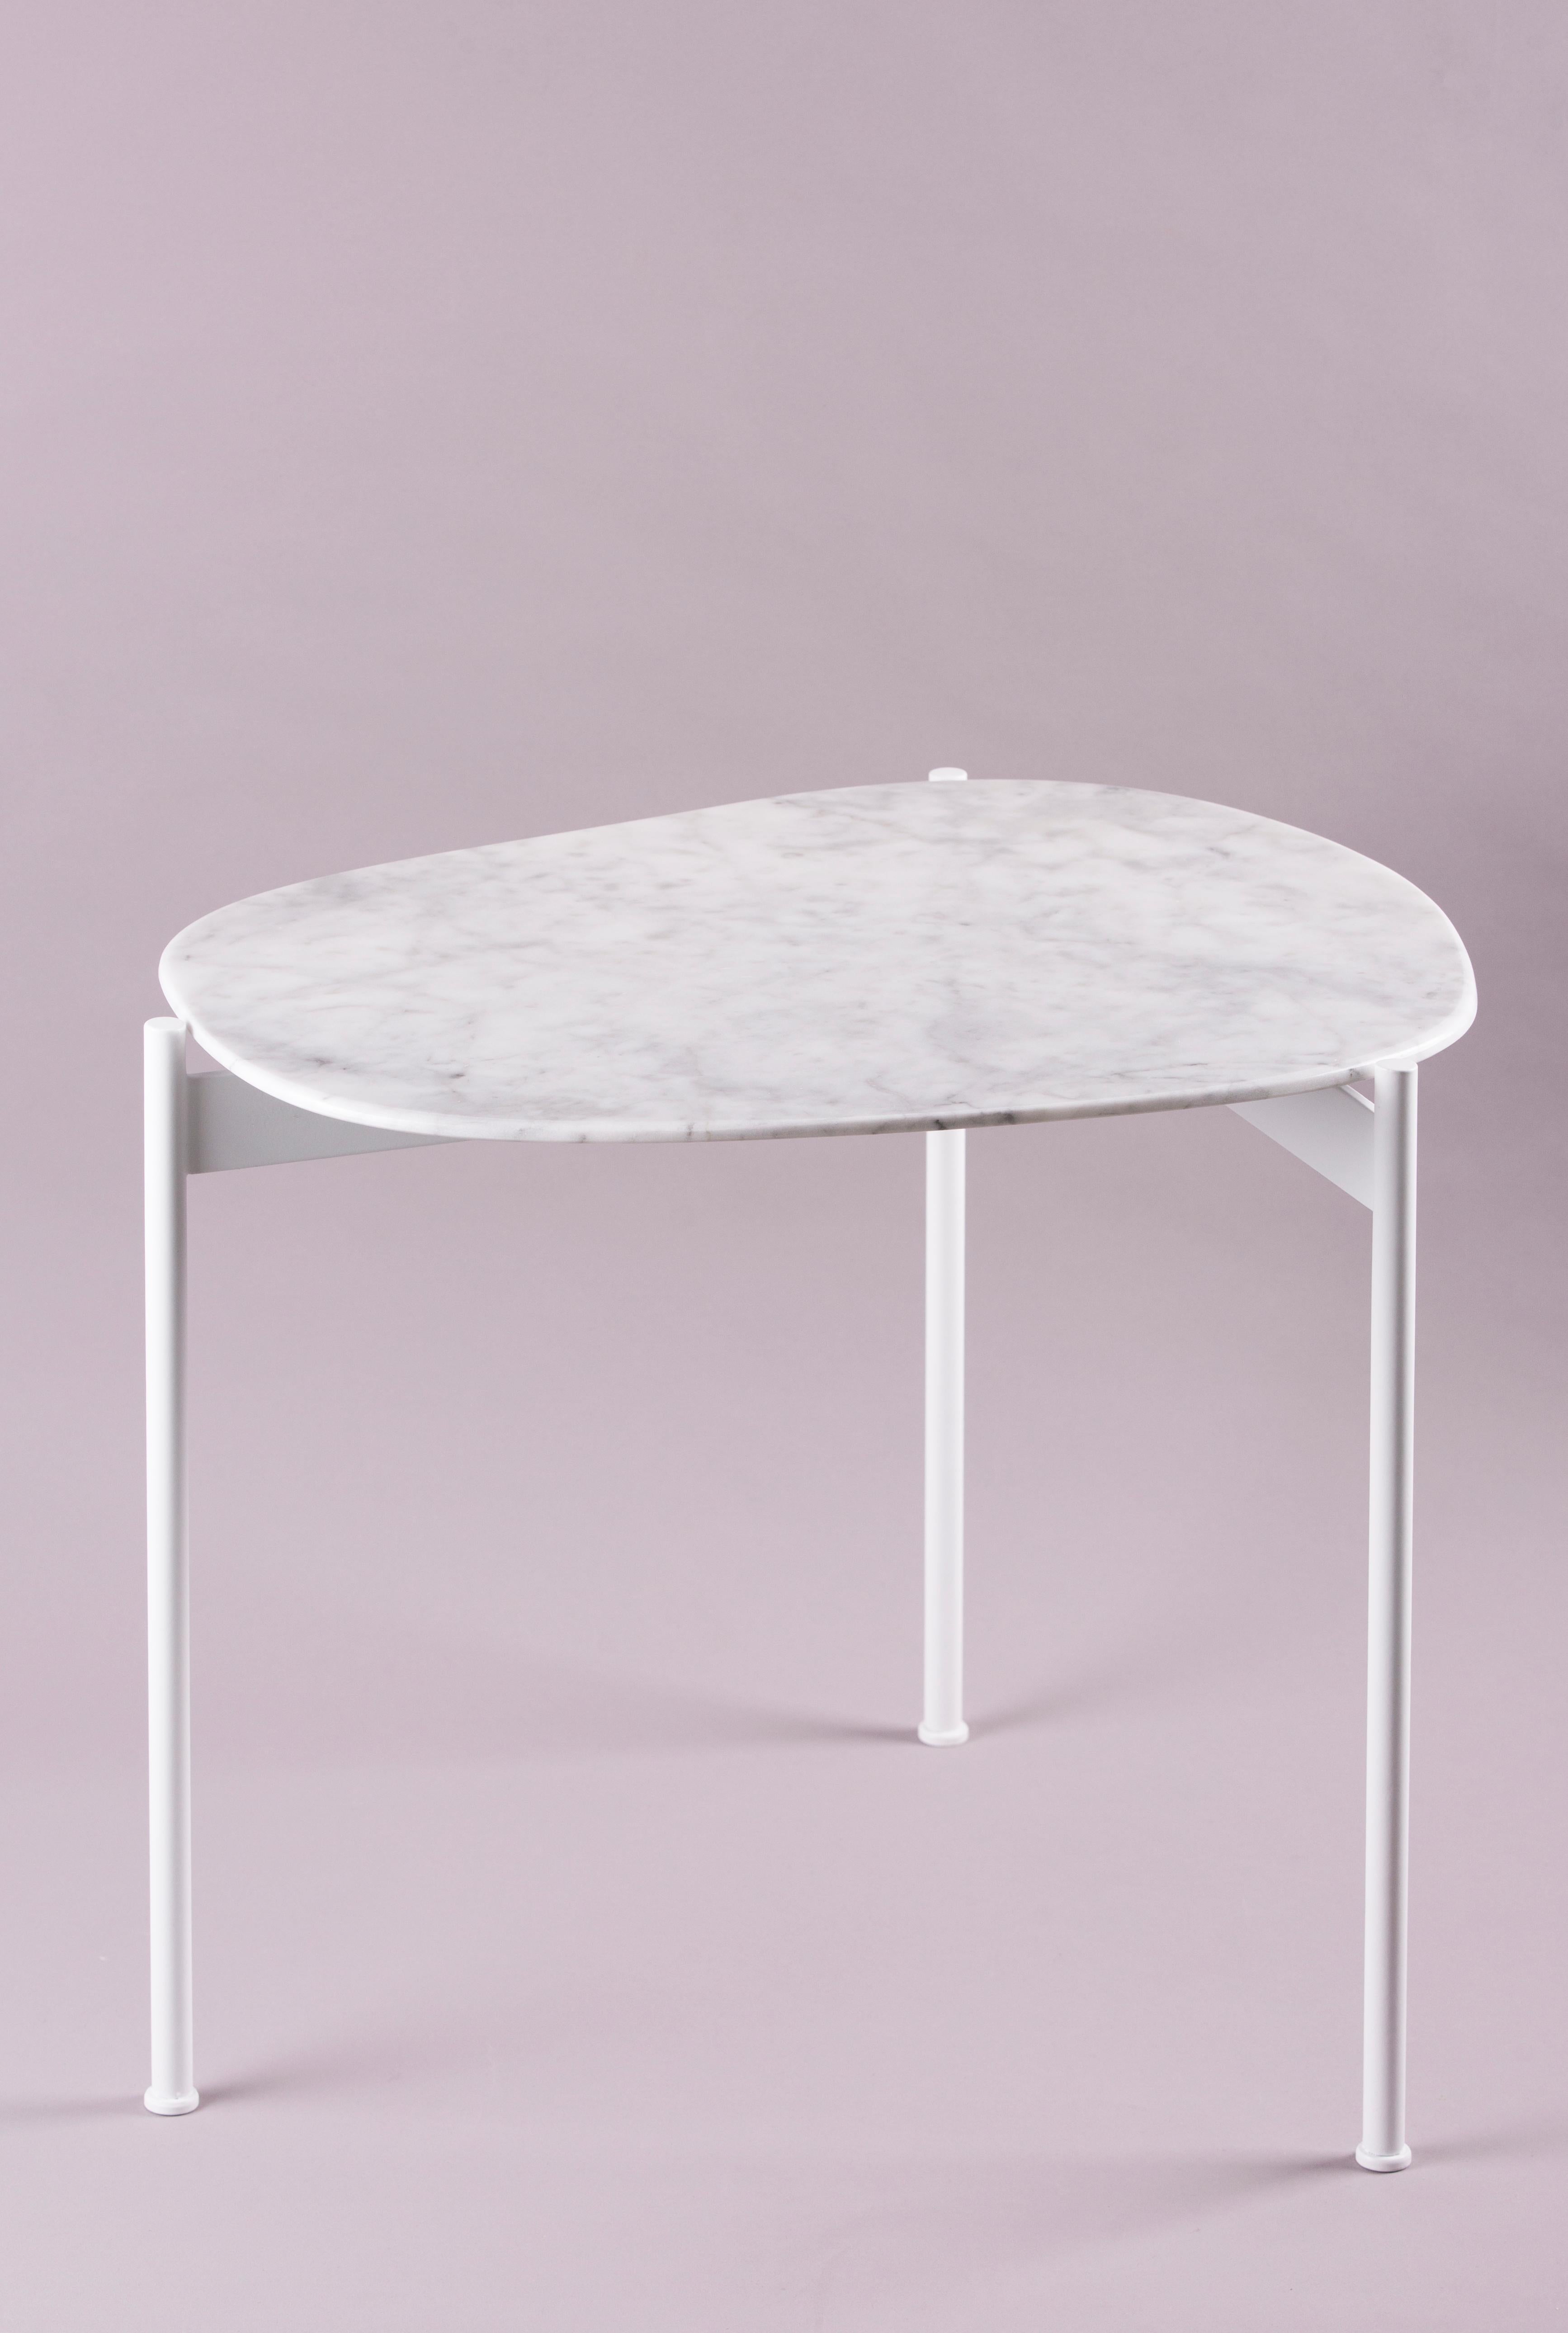 Tas coffee table by Rectangle Studio
Dimensions: W 44 x D 52 x H 45 cm 
Materials: White marble, white paint coating on metal

We produced 'Tas02' which is inspired by the stones that are shaped by nature and with its freeform.
On every